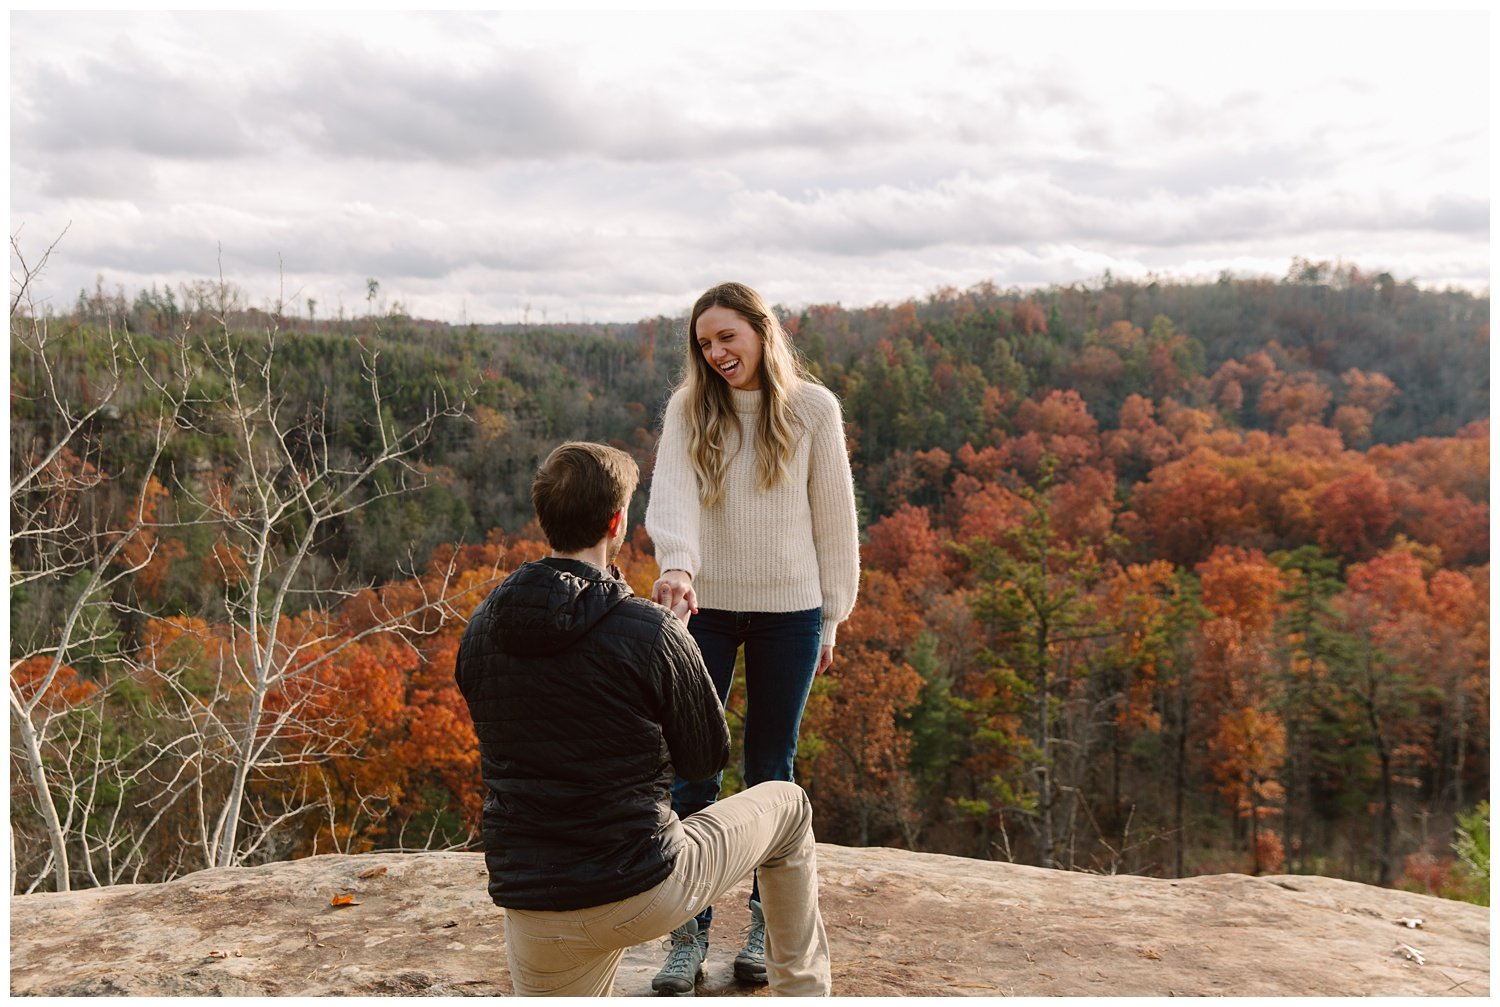 kendra_Farris_photography_red_river_gorge_photographer_proposal_engagement_elopement-7.jpg